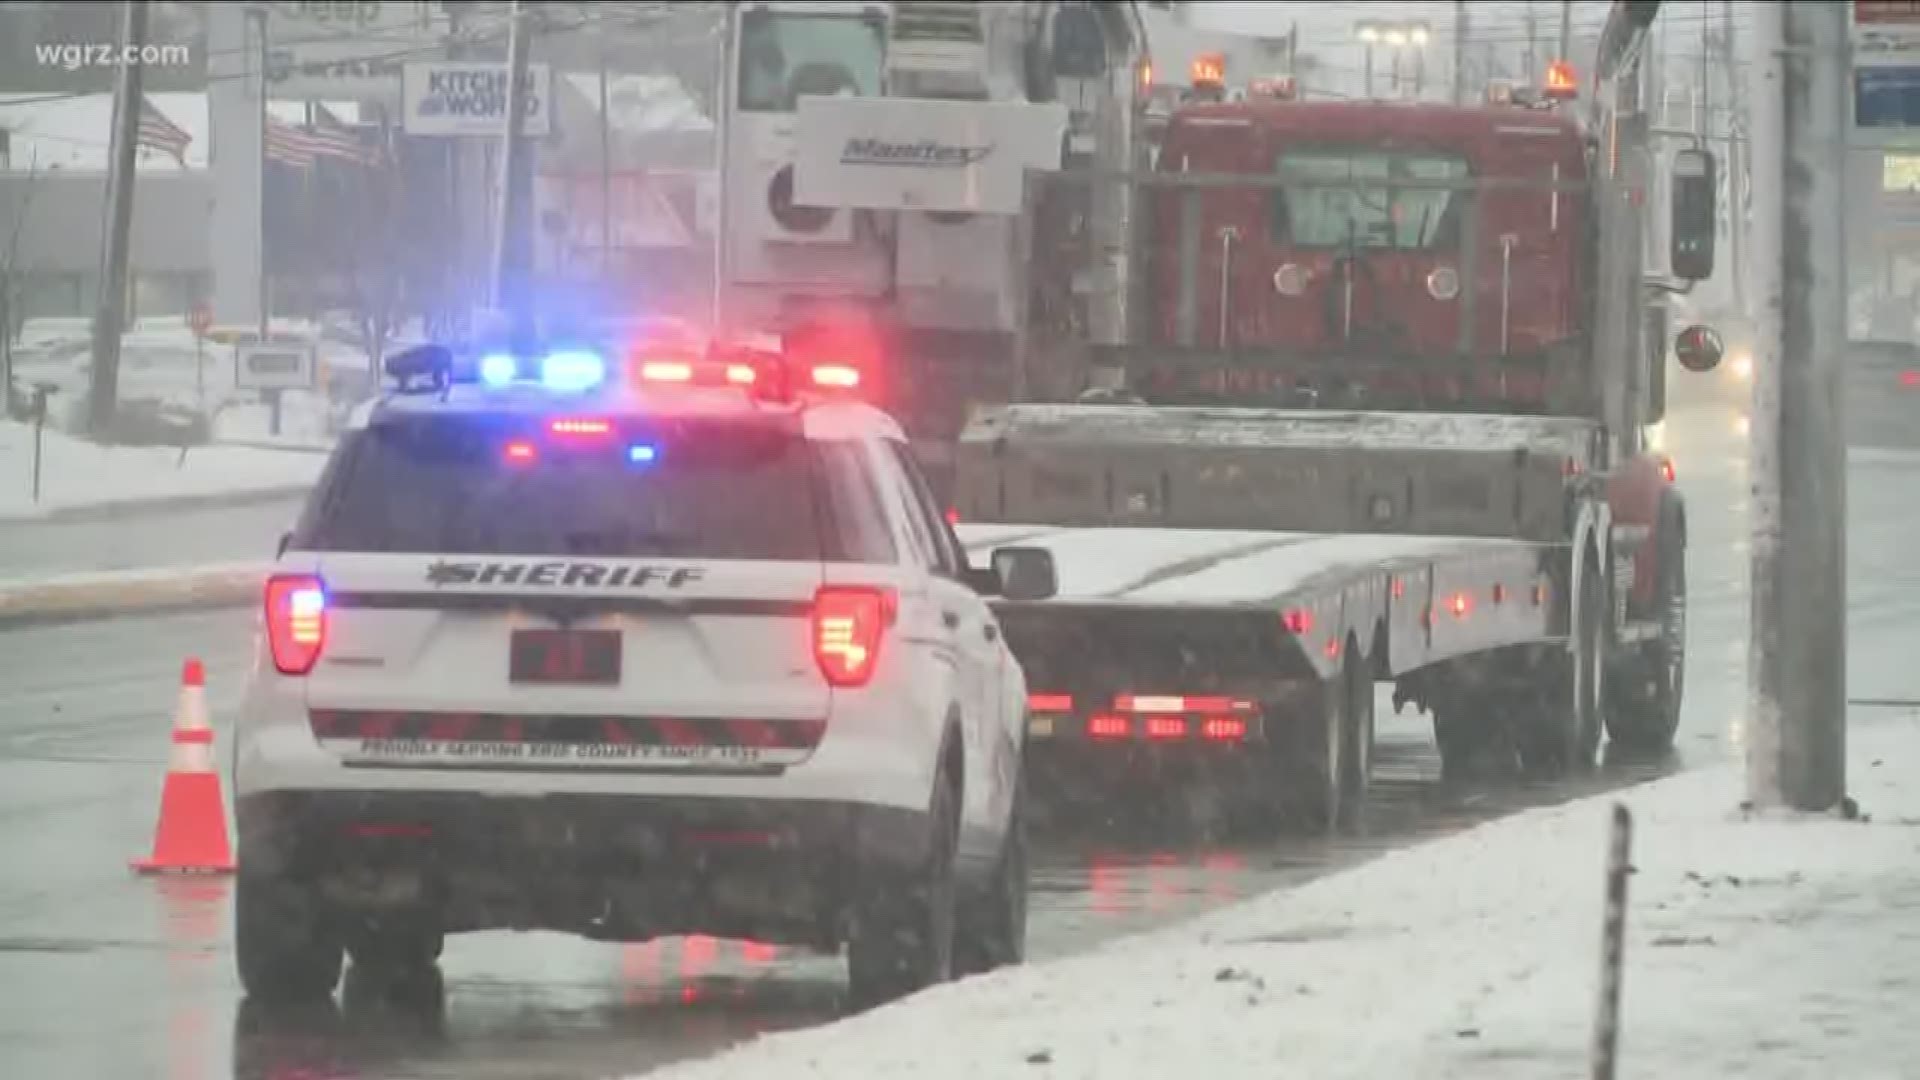 Erie County sheriff's office says a tractor-trailer hit that man near Main Street around seven and the driver stayed at the scene and talked to investigators.